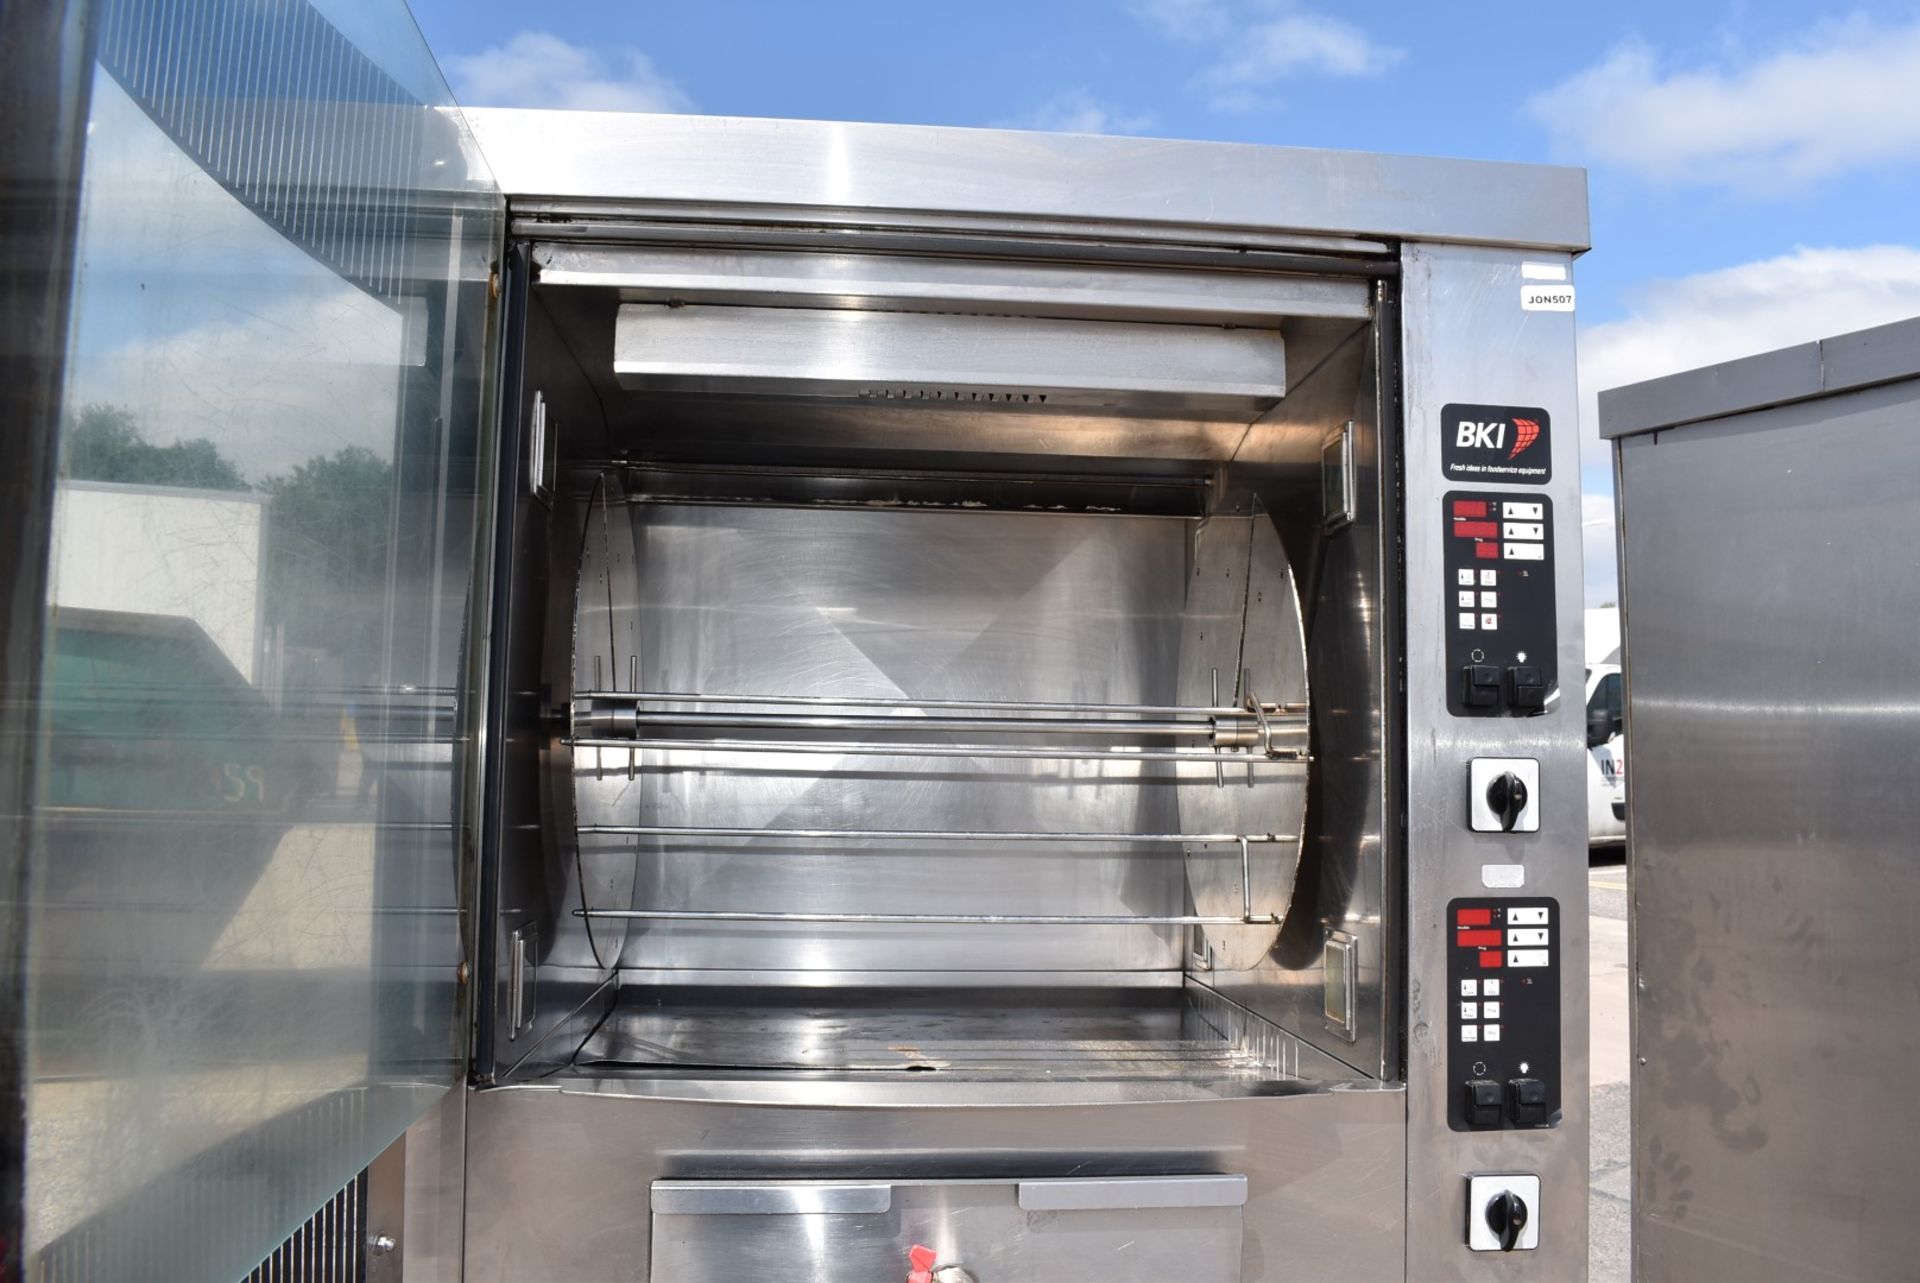 1 x BKI BBQ King Commercial Double Rotisserie Chicken Oven With Stand - Type VGUK16 - 3 Phase - Image 2 of 21